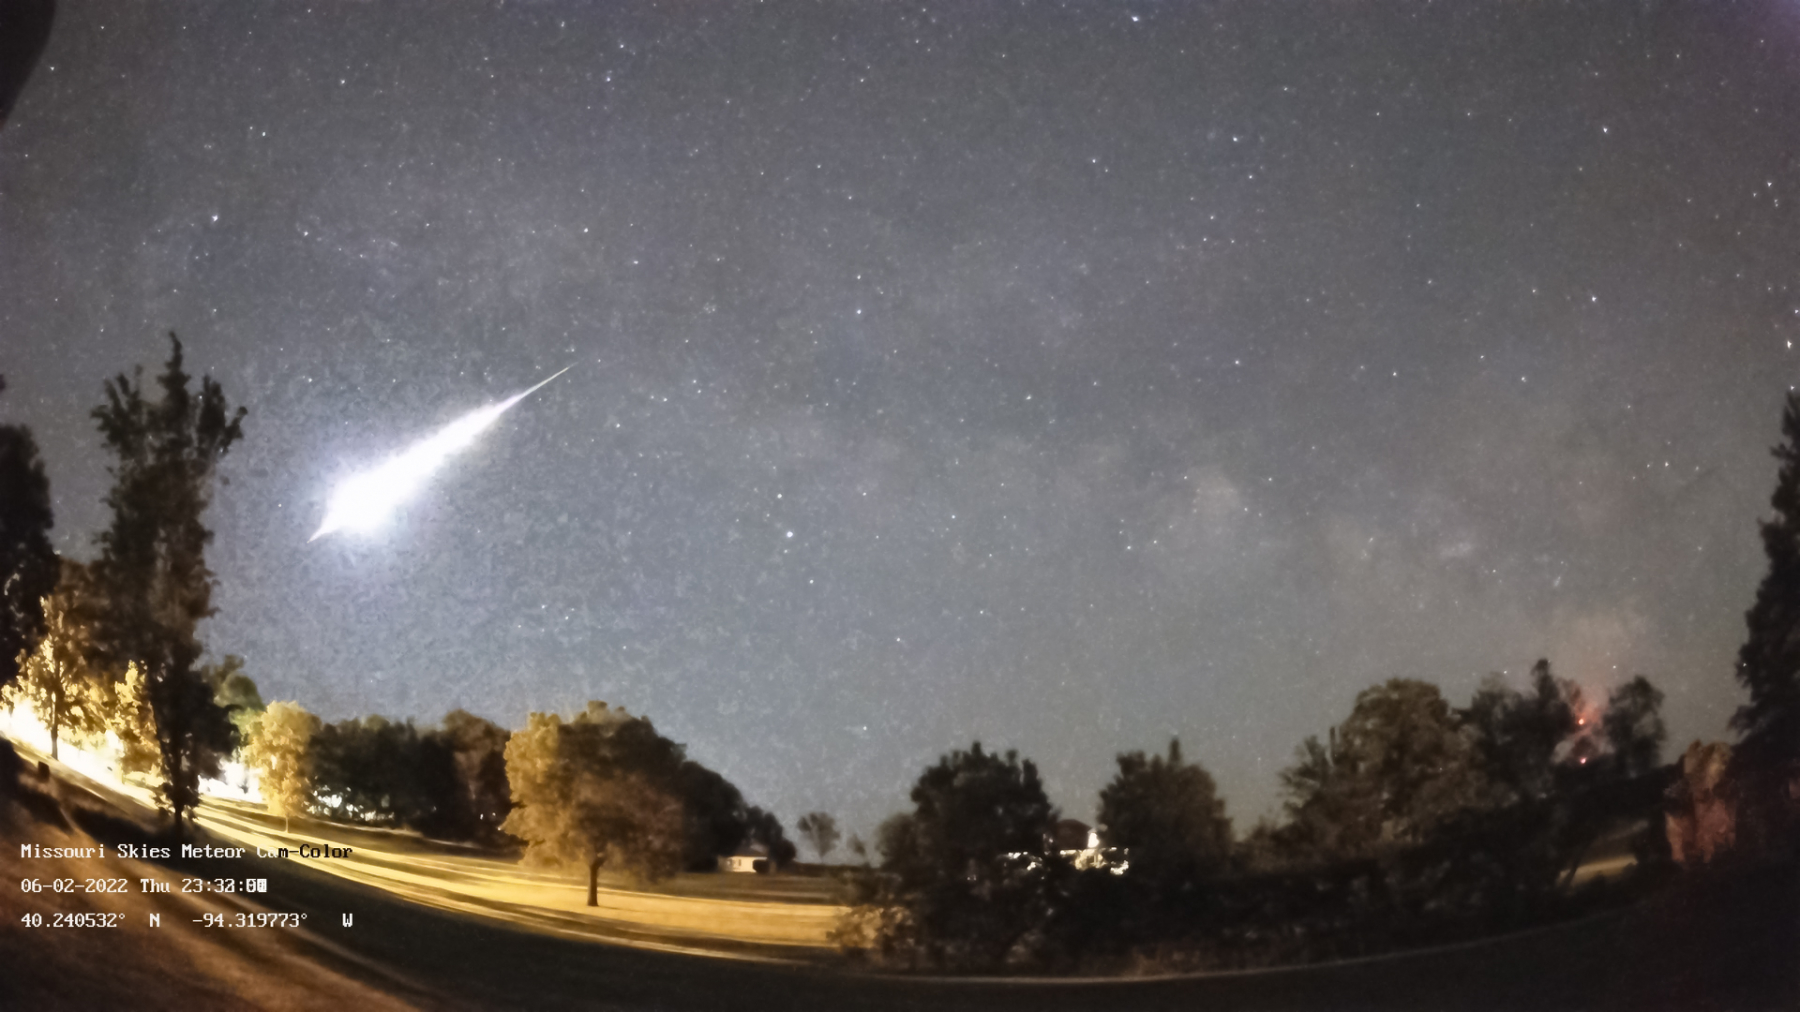 Meteor Activity Outlook for August 13-19, 2022